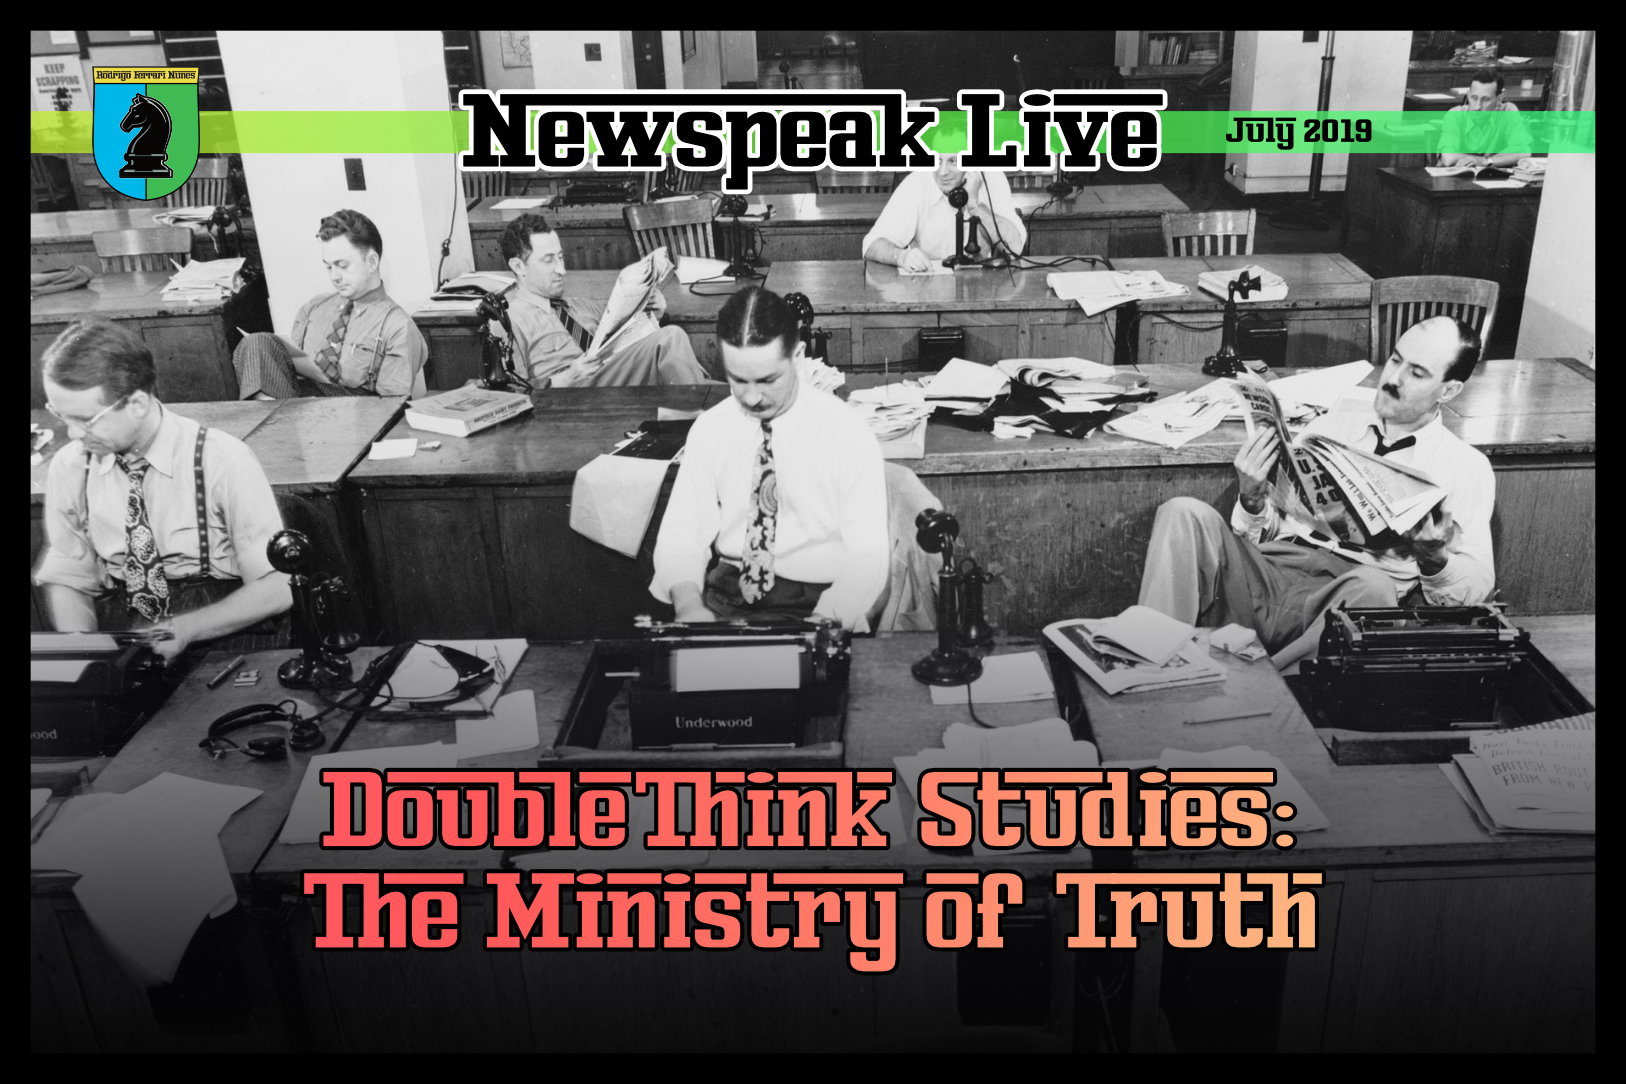 DoubleThink Studies: The Ministry of Truth